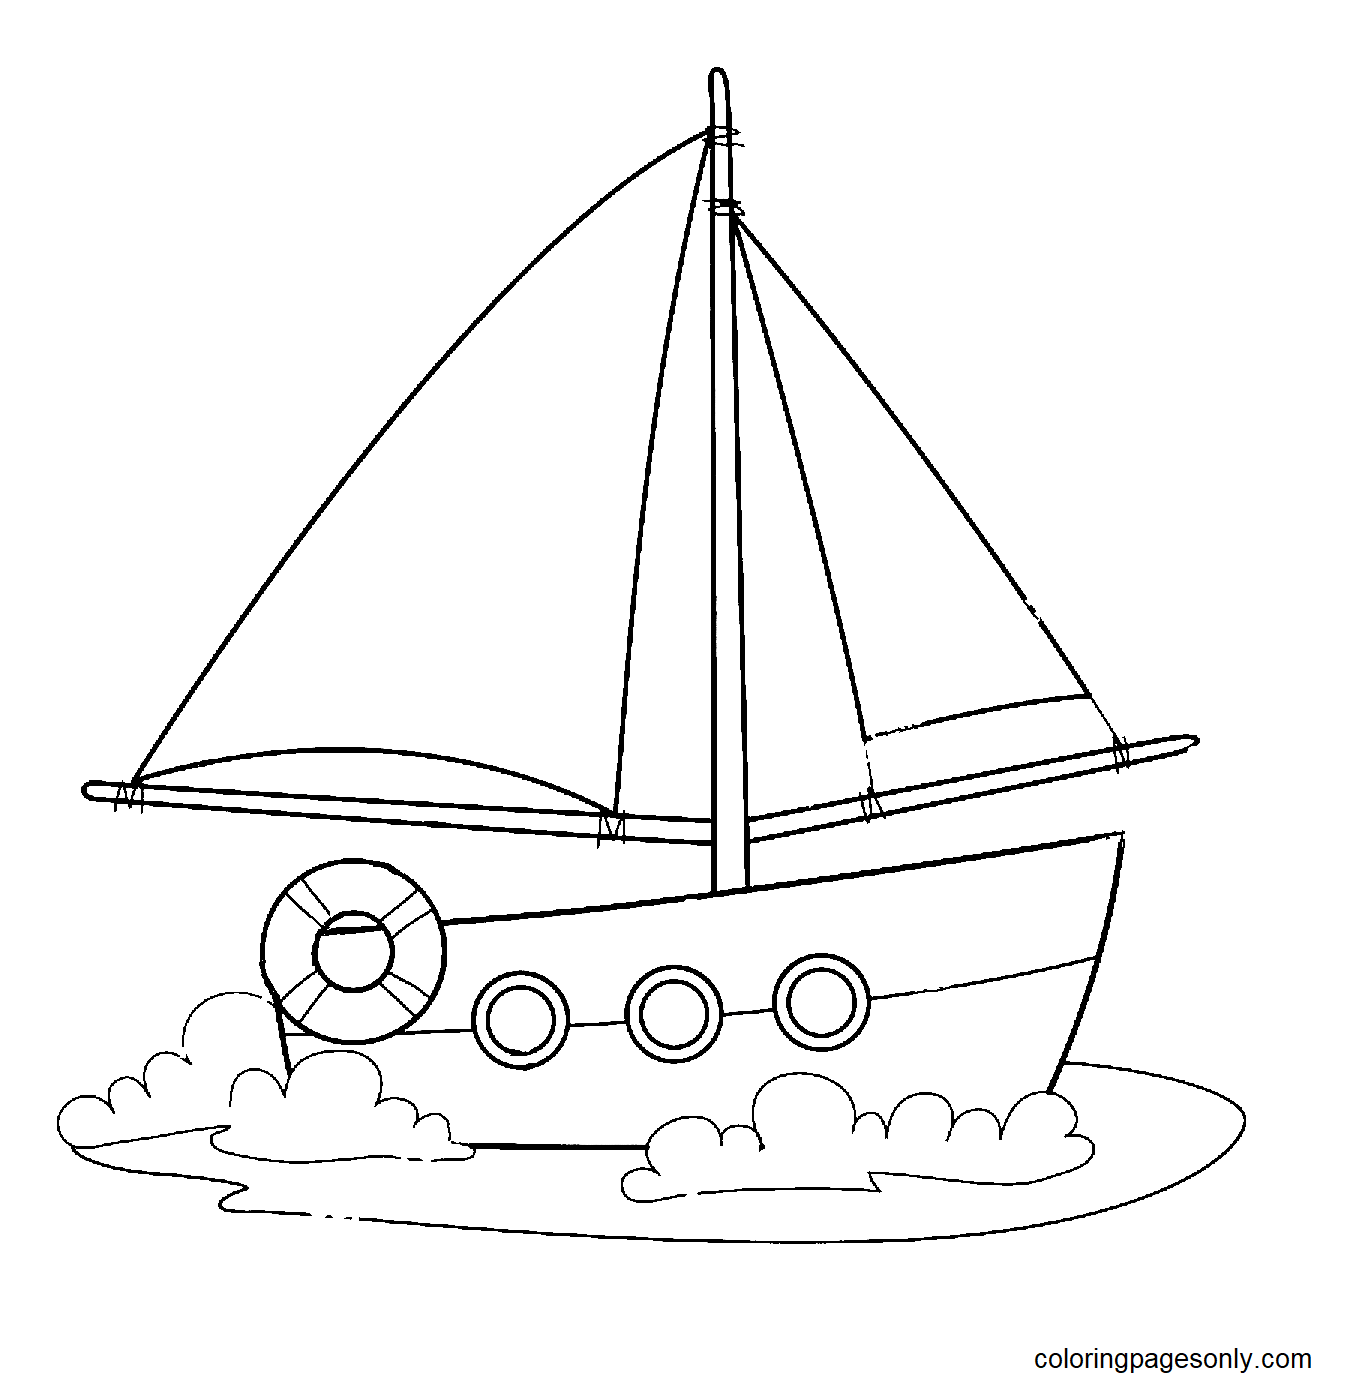 Sailing Vessel Coloring Page